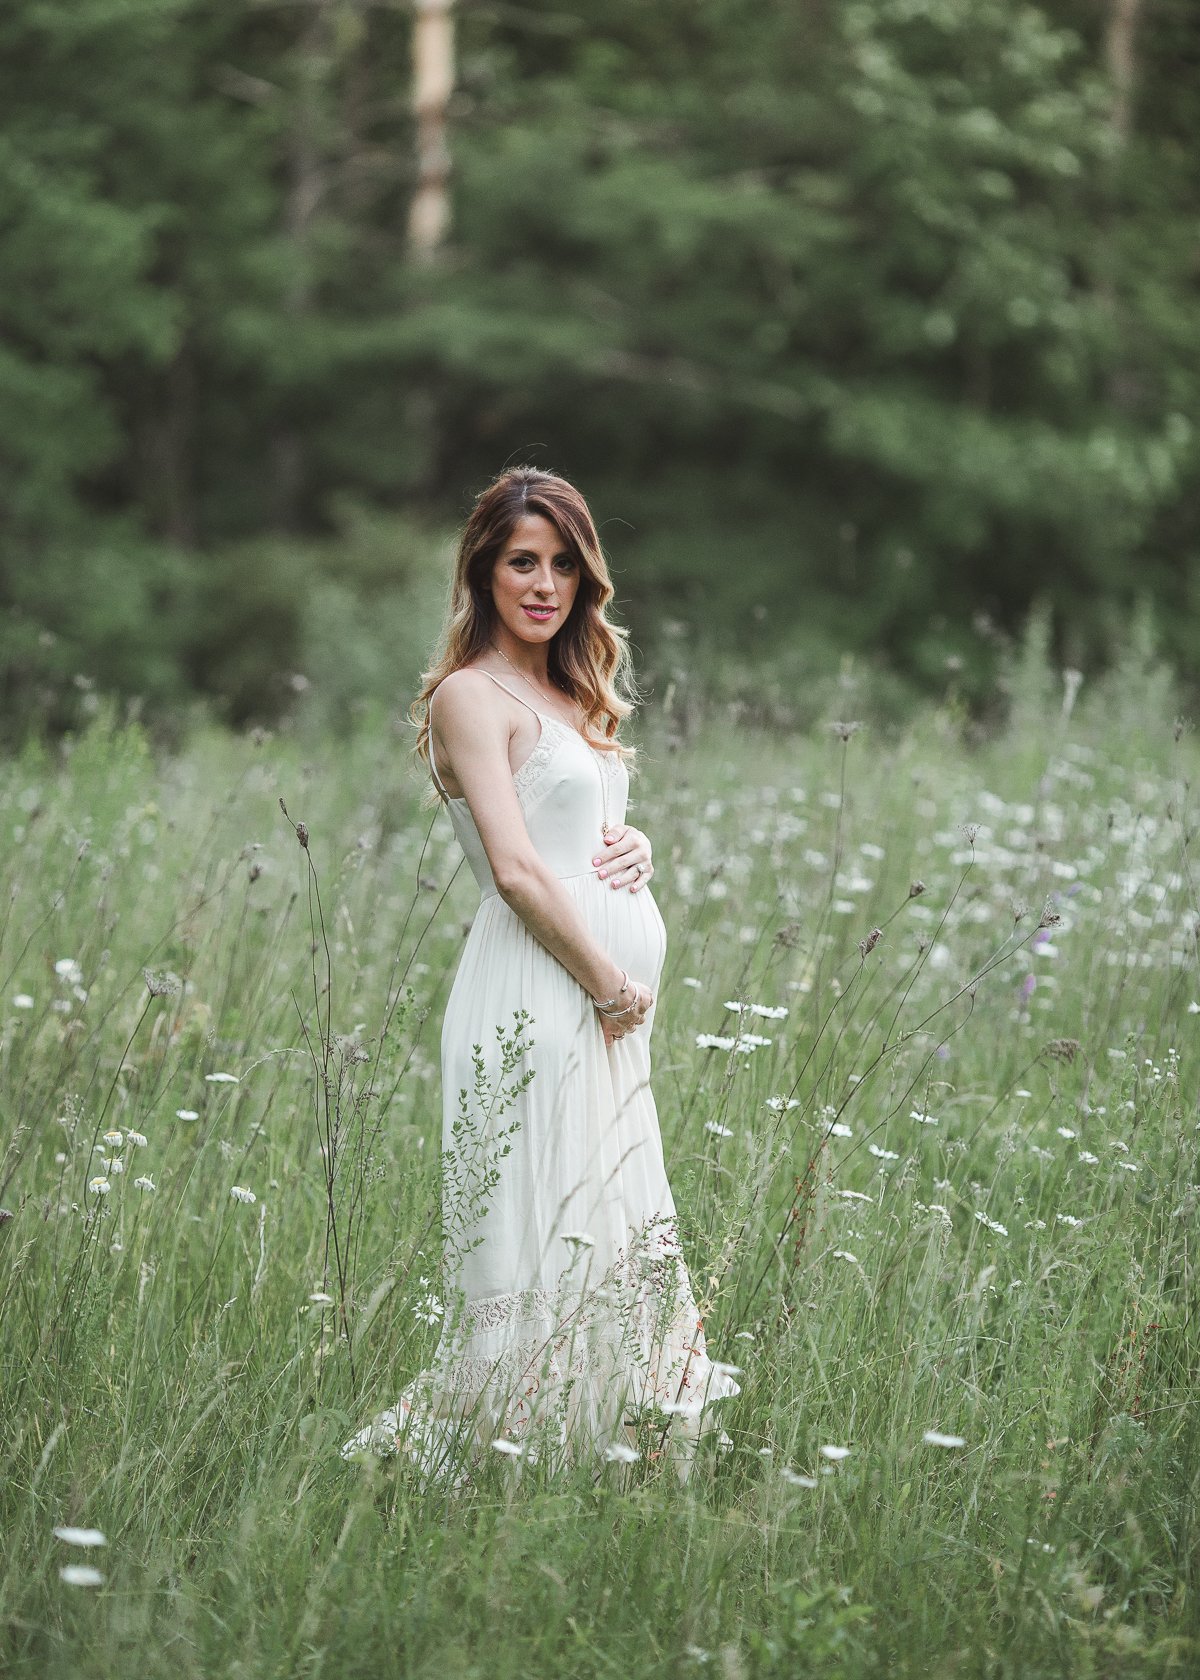 5 Reasons Why Every New Mother Needs Maternity Photos 2 Daily Mom, Magazine For Families